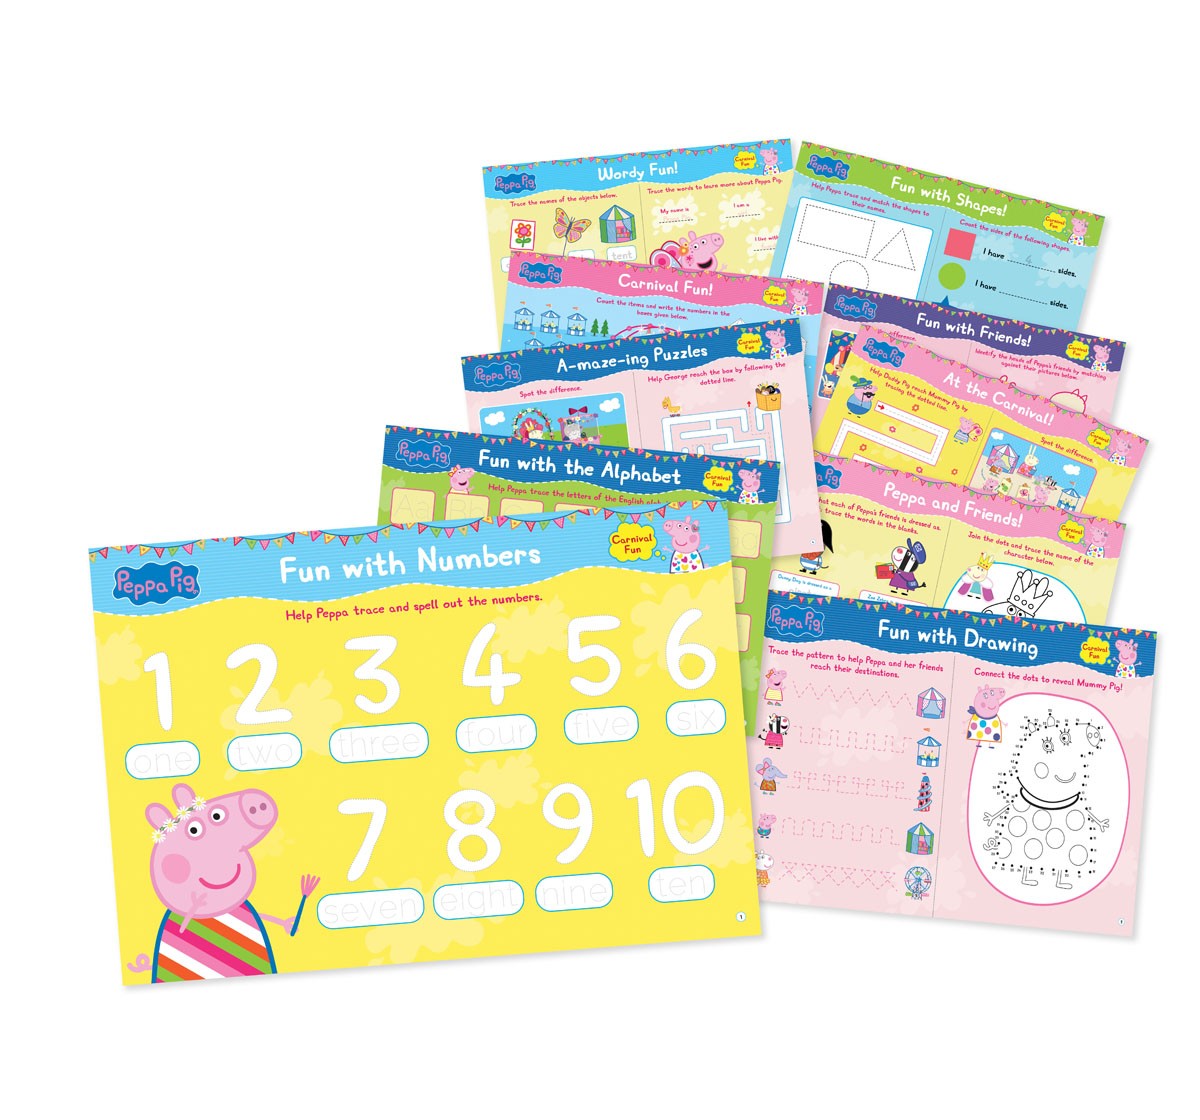 Wonder House Books Peppa Loves Carnival Fun Learning Activity Set for kids 3Y+, Multicolour